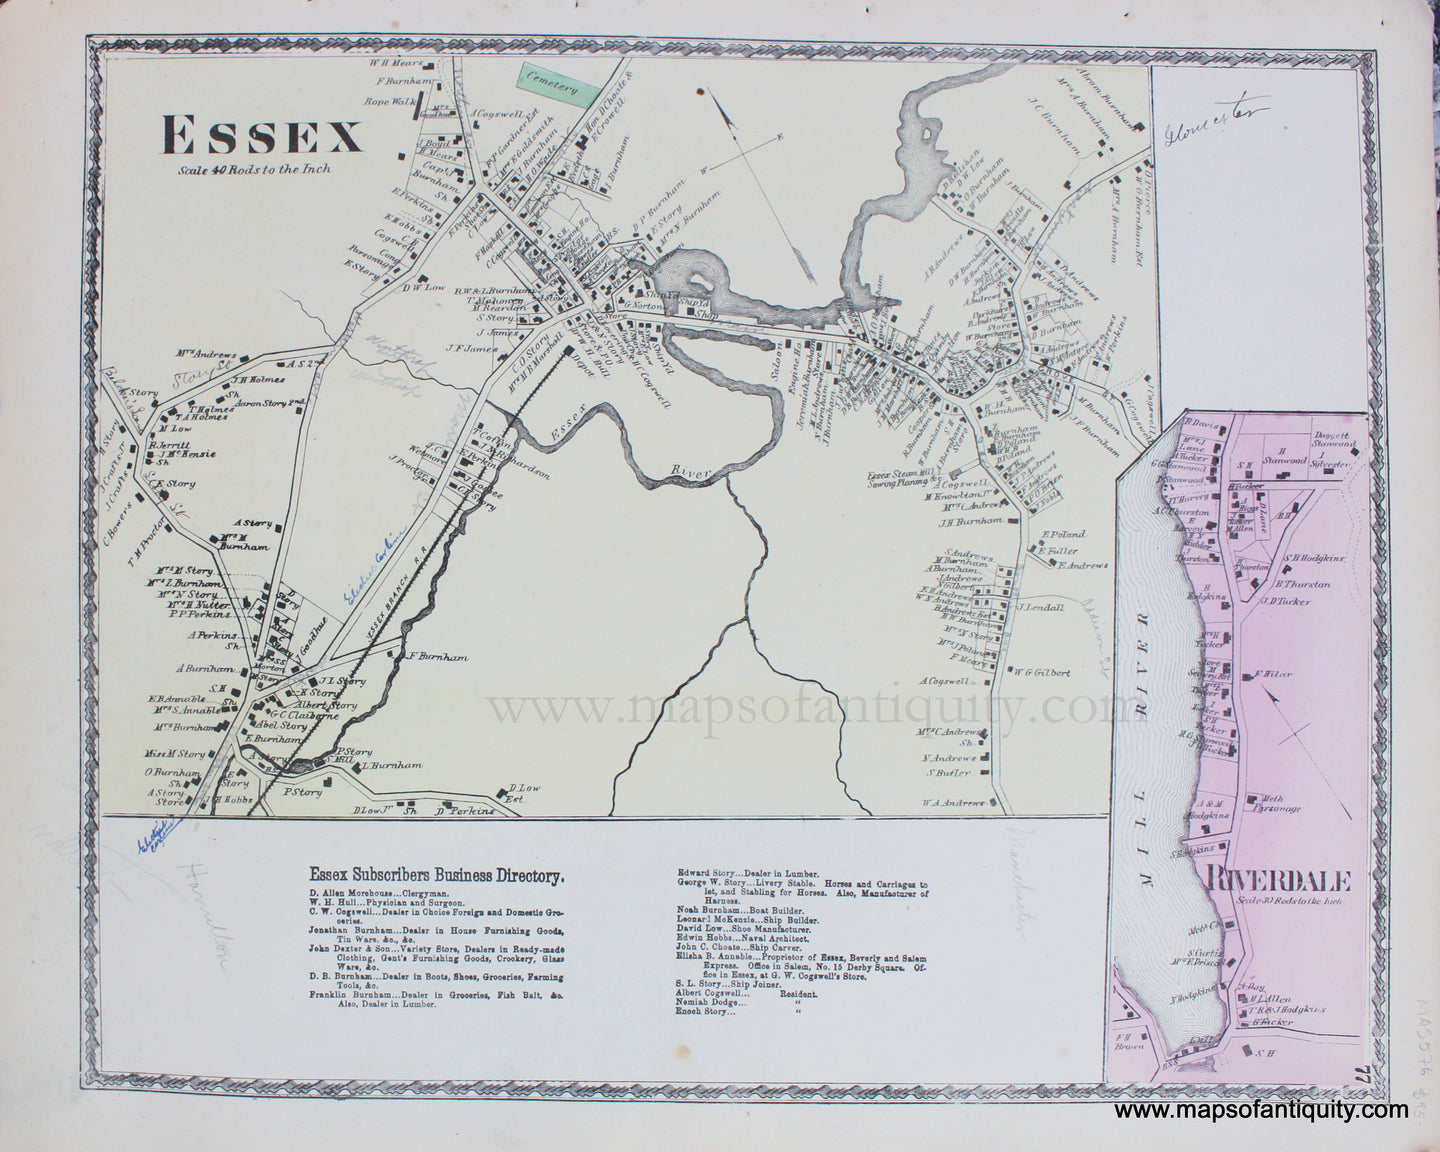 Antique-Hand-Colored-Map-Essex-(Center)-Riverdale-Massachusetts-**********-Essex-County--1872-Beers-Maps-Of-Antiquity